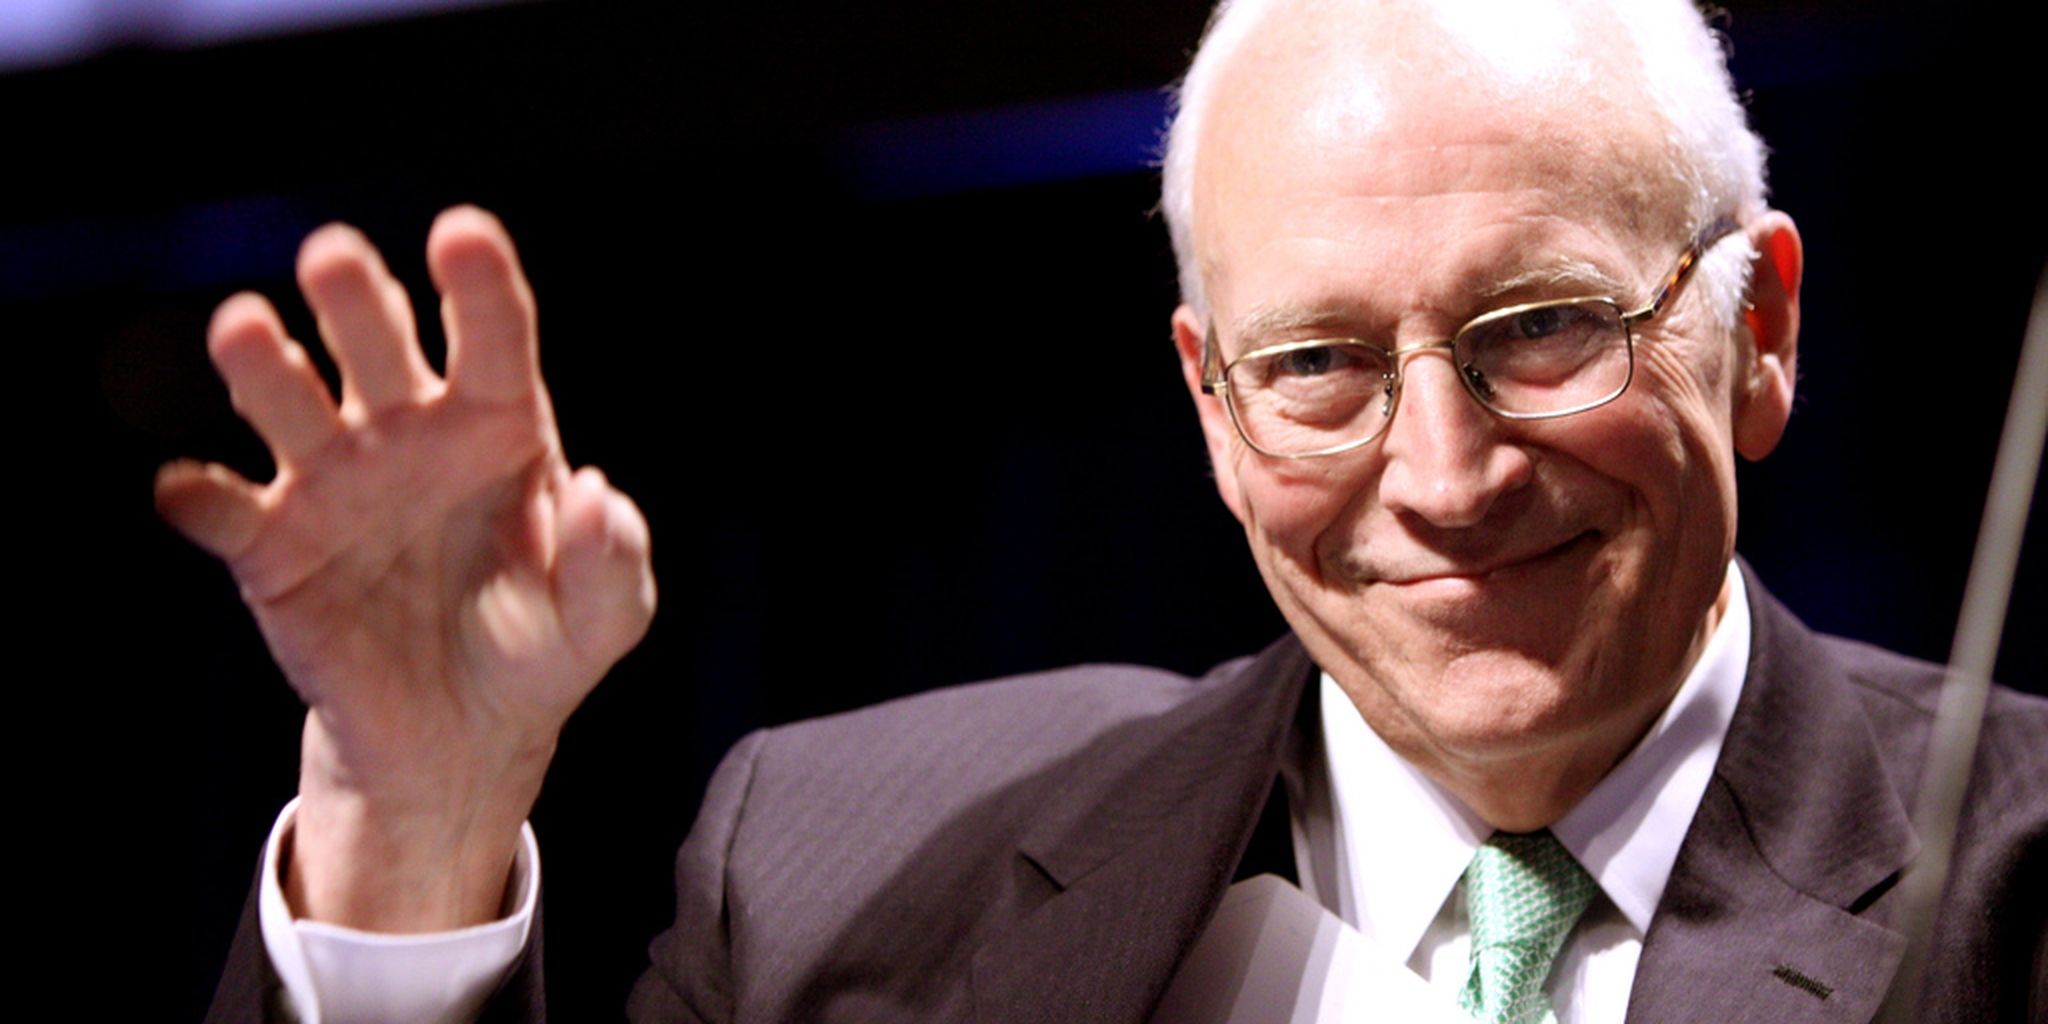 Lord P. S. recommendet dick Information cheney on